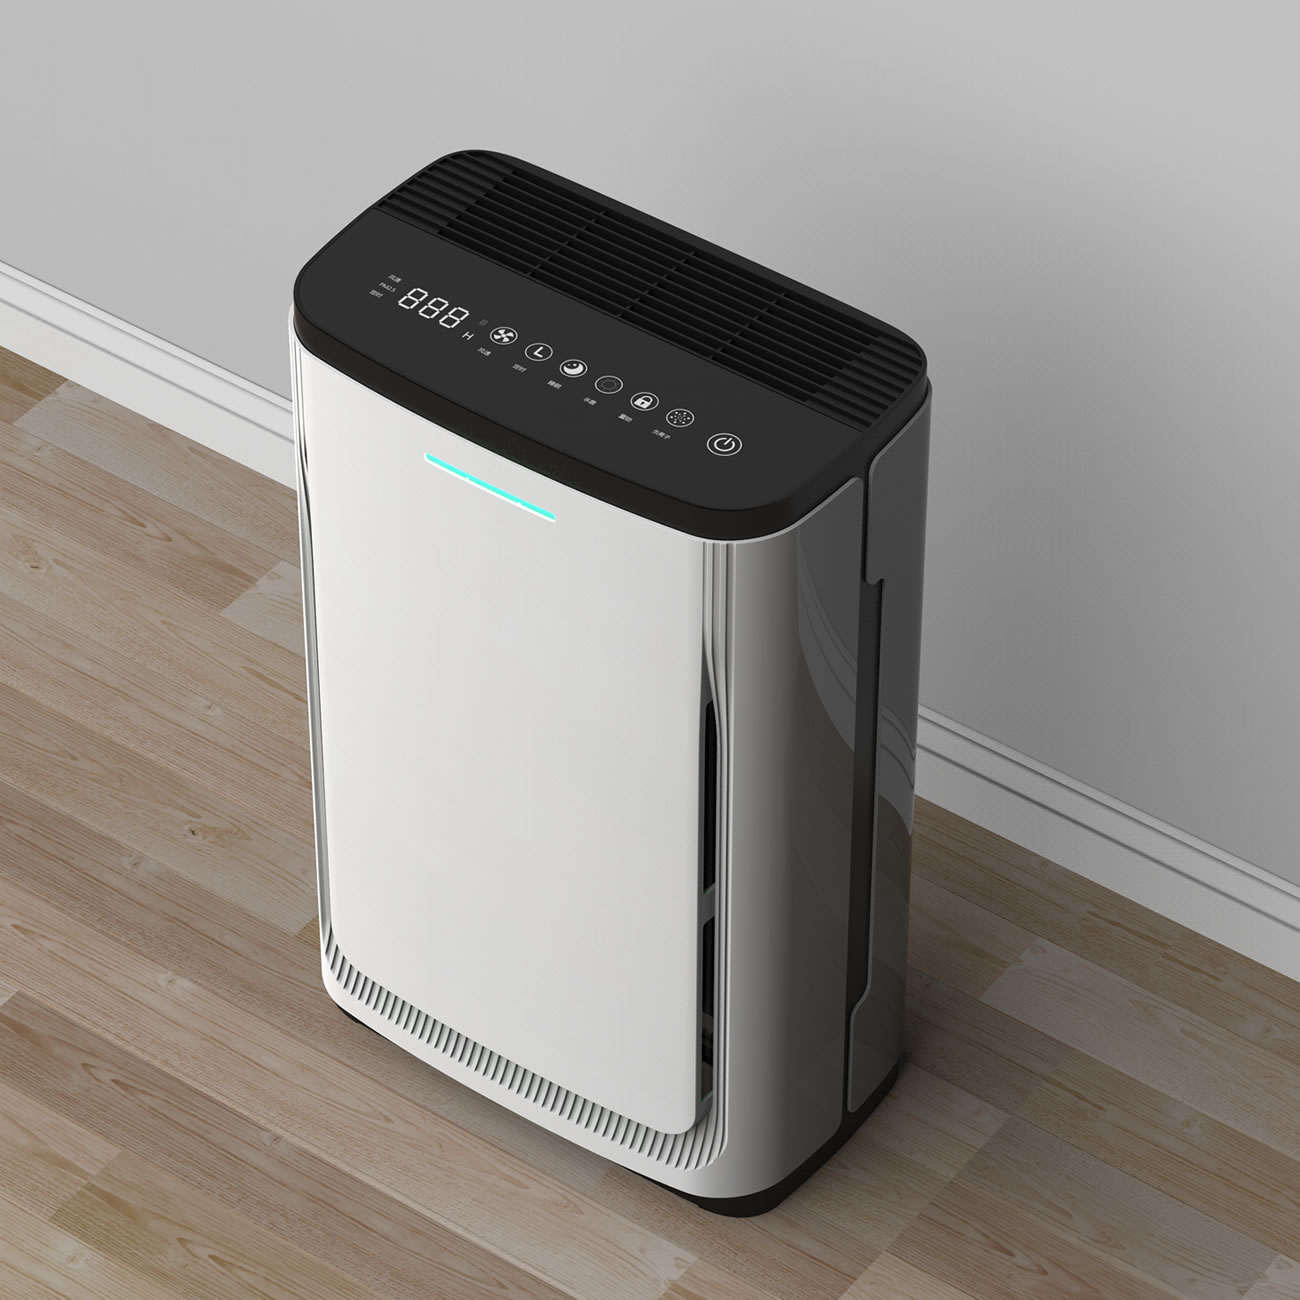 What should I pay attention to when purchasing HEPA air purifier for office and bedroom